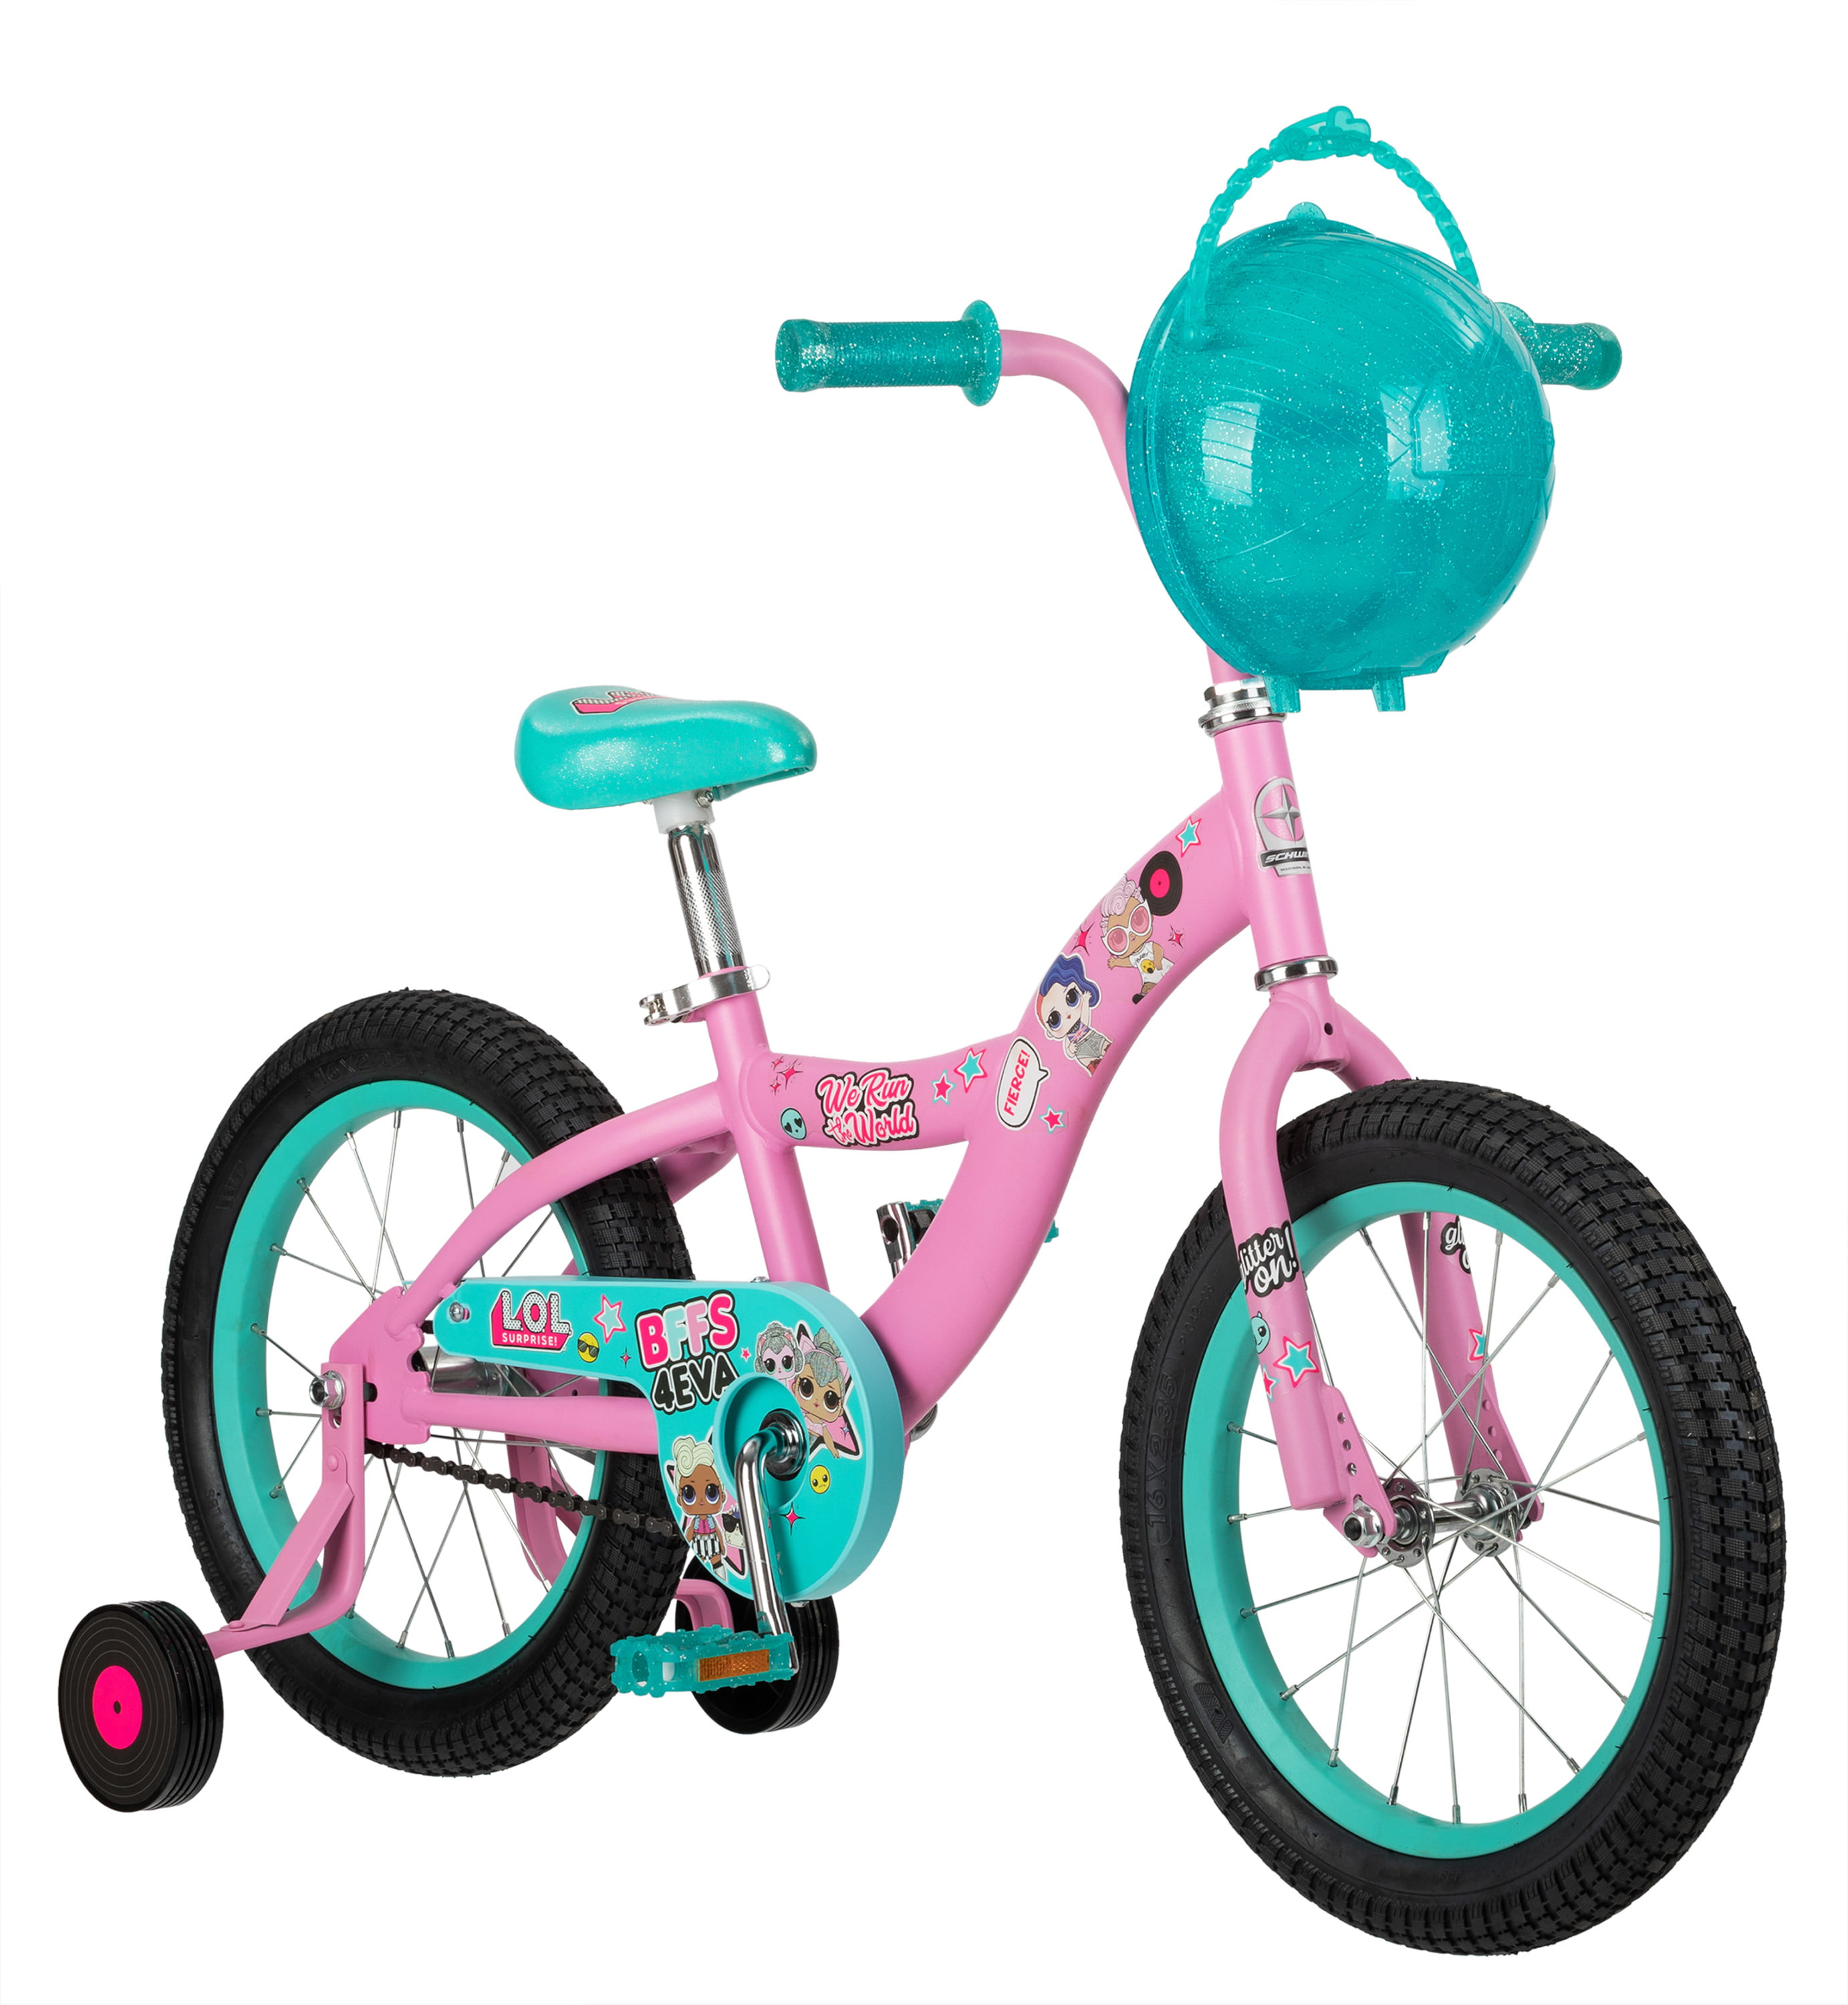 Surprise 16 Inch L.O.L Bike LOL Doll Pink Bicycle Stabilisers Girls Kids Gift 